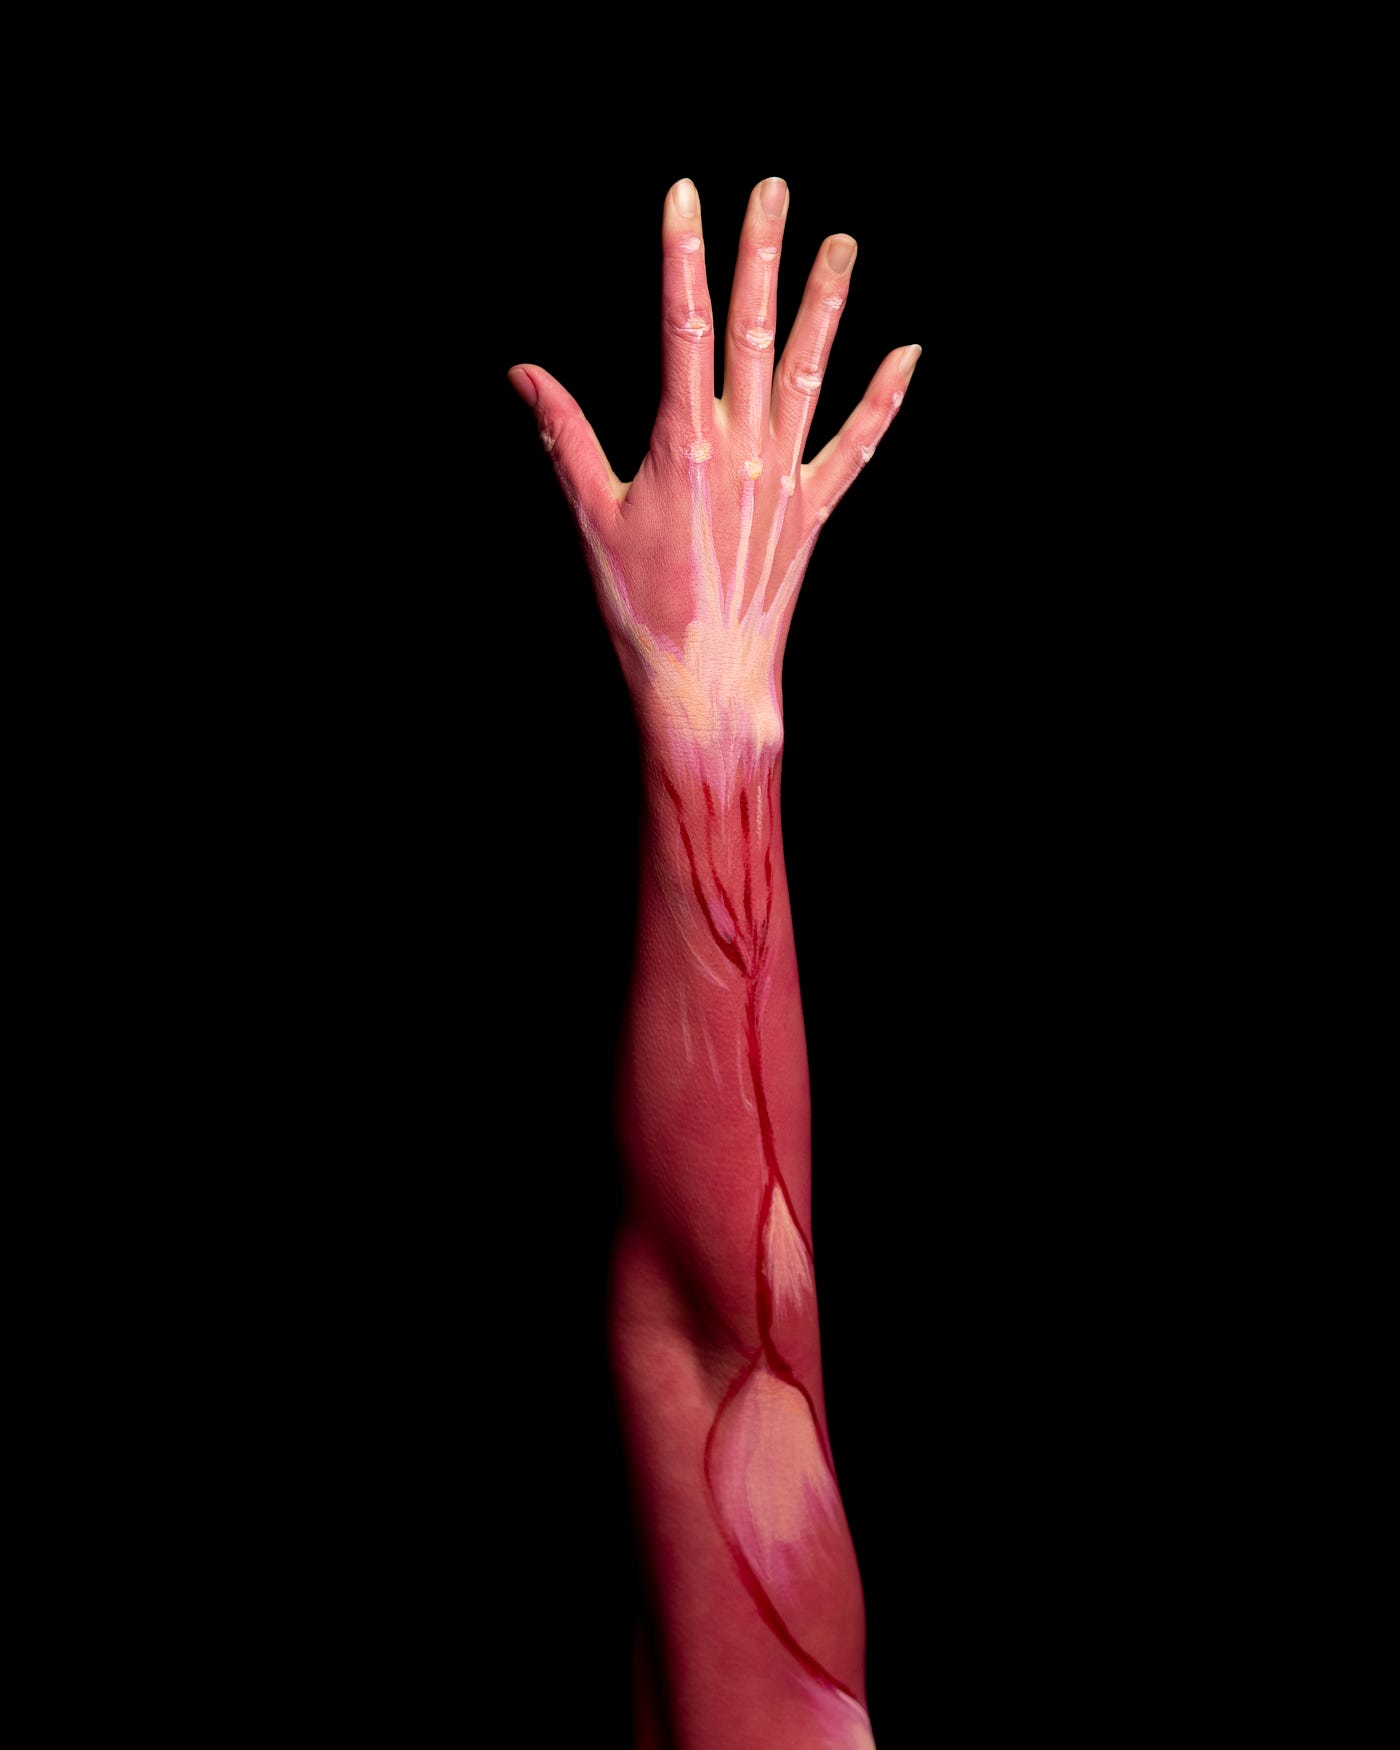 A right arm extends upwards. The model has no skin, so we see the musculature and arteries.